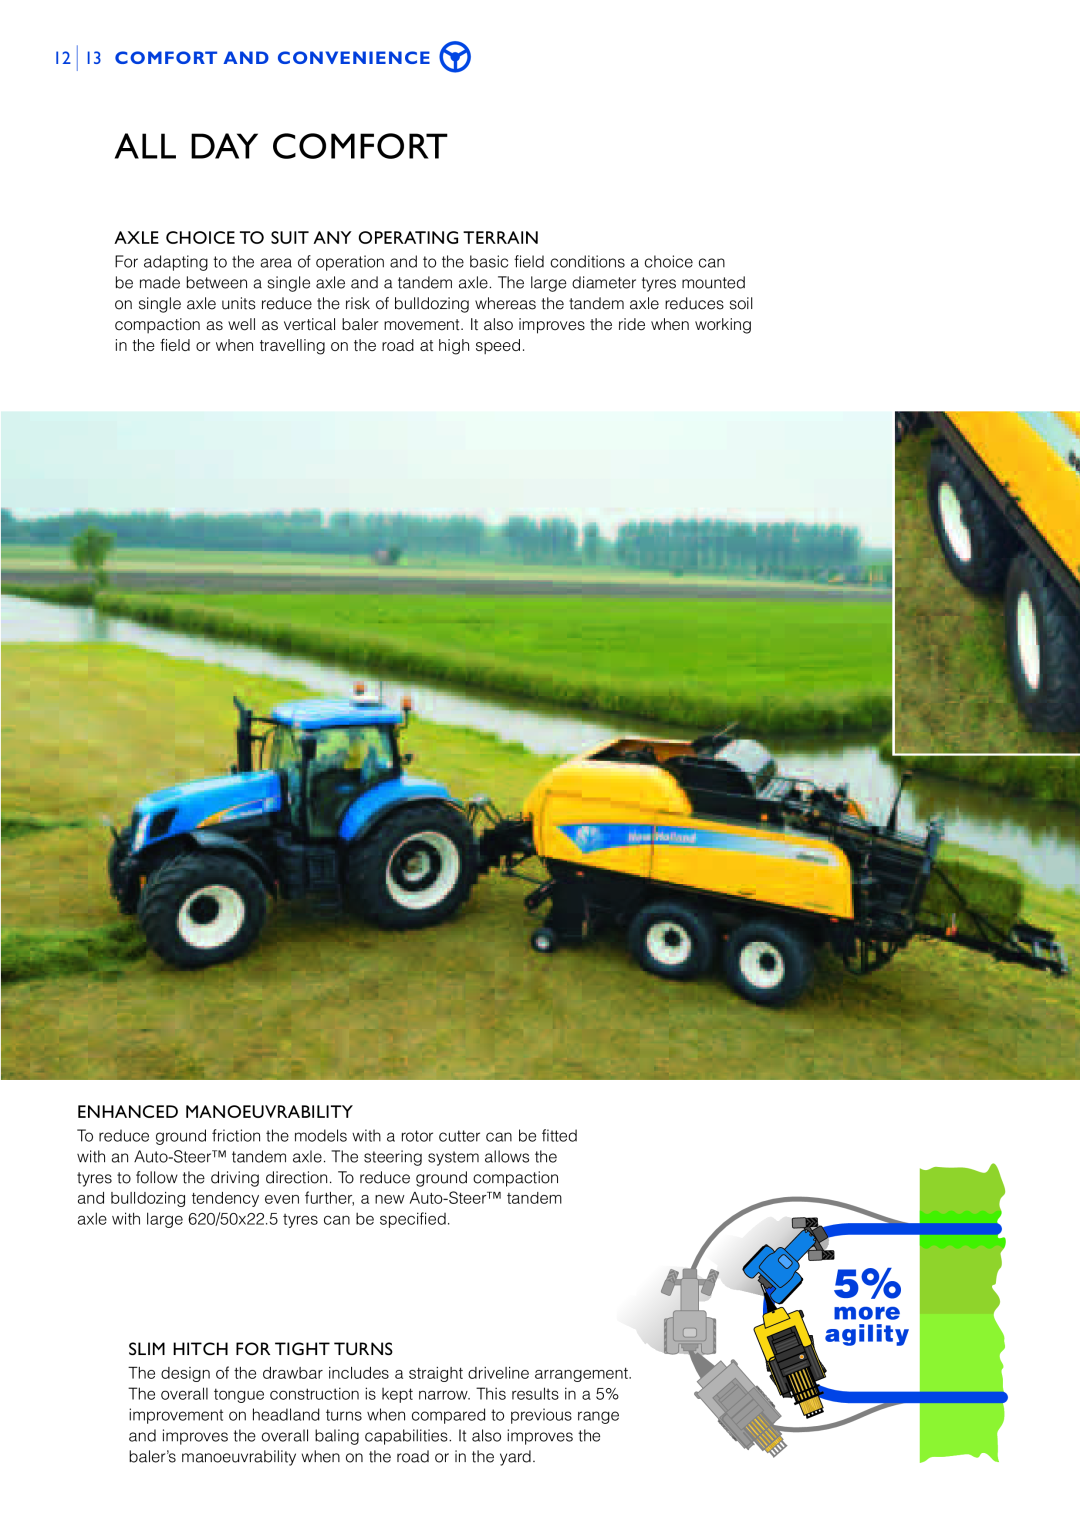 New Holland BB9O6O manual All Day Comfort, Comfort And Convenience, Axle Choice To Suit Any Operating Terrain, more agility 